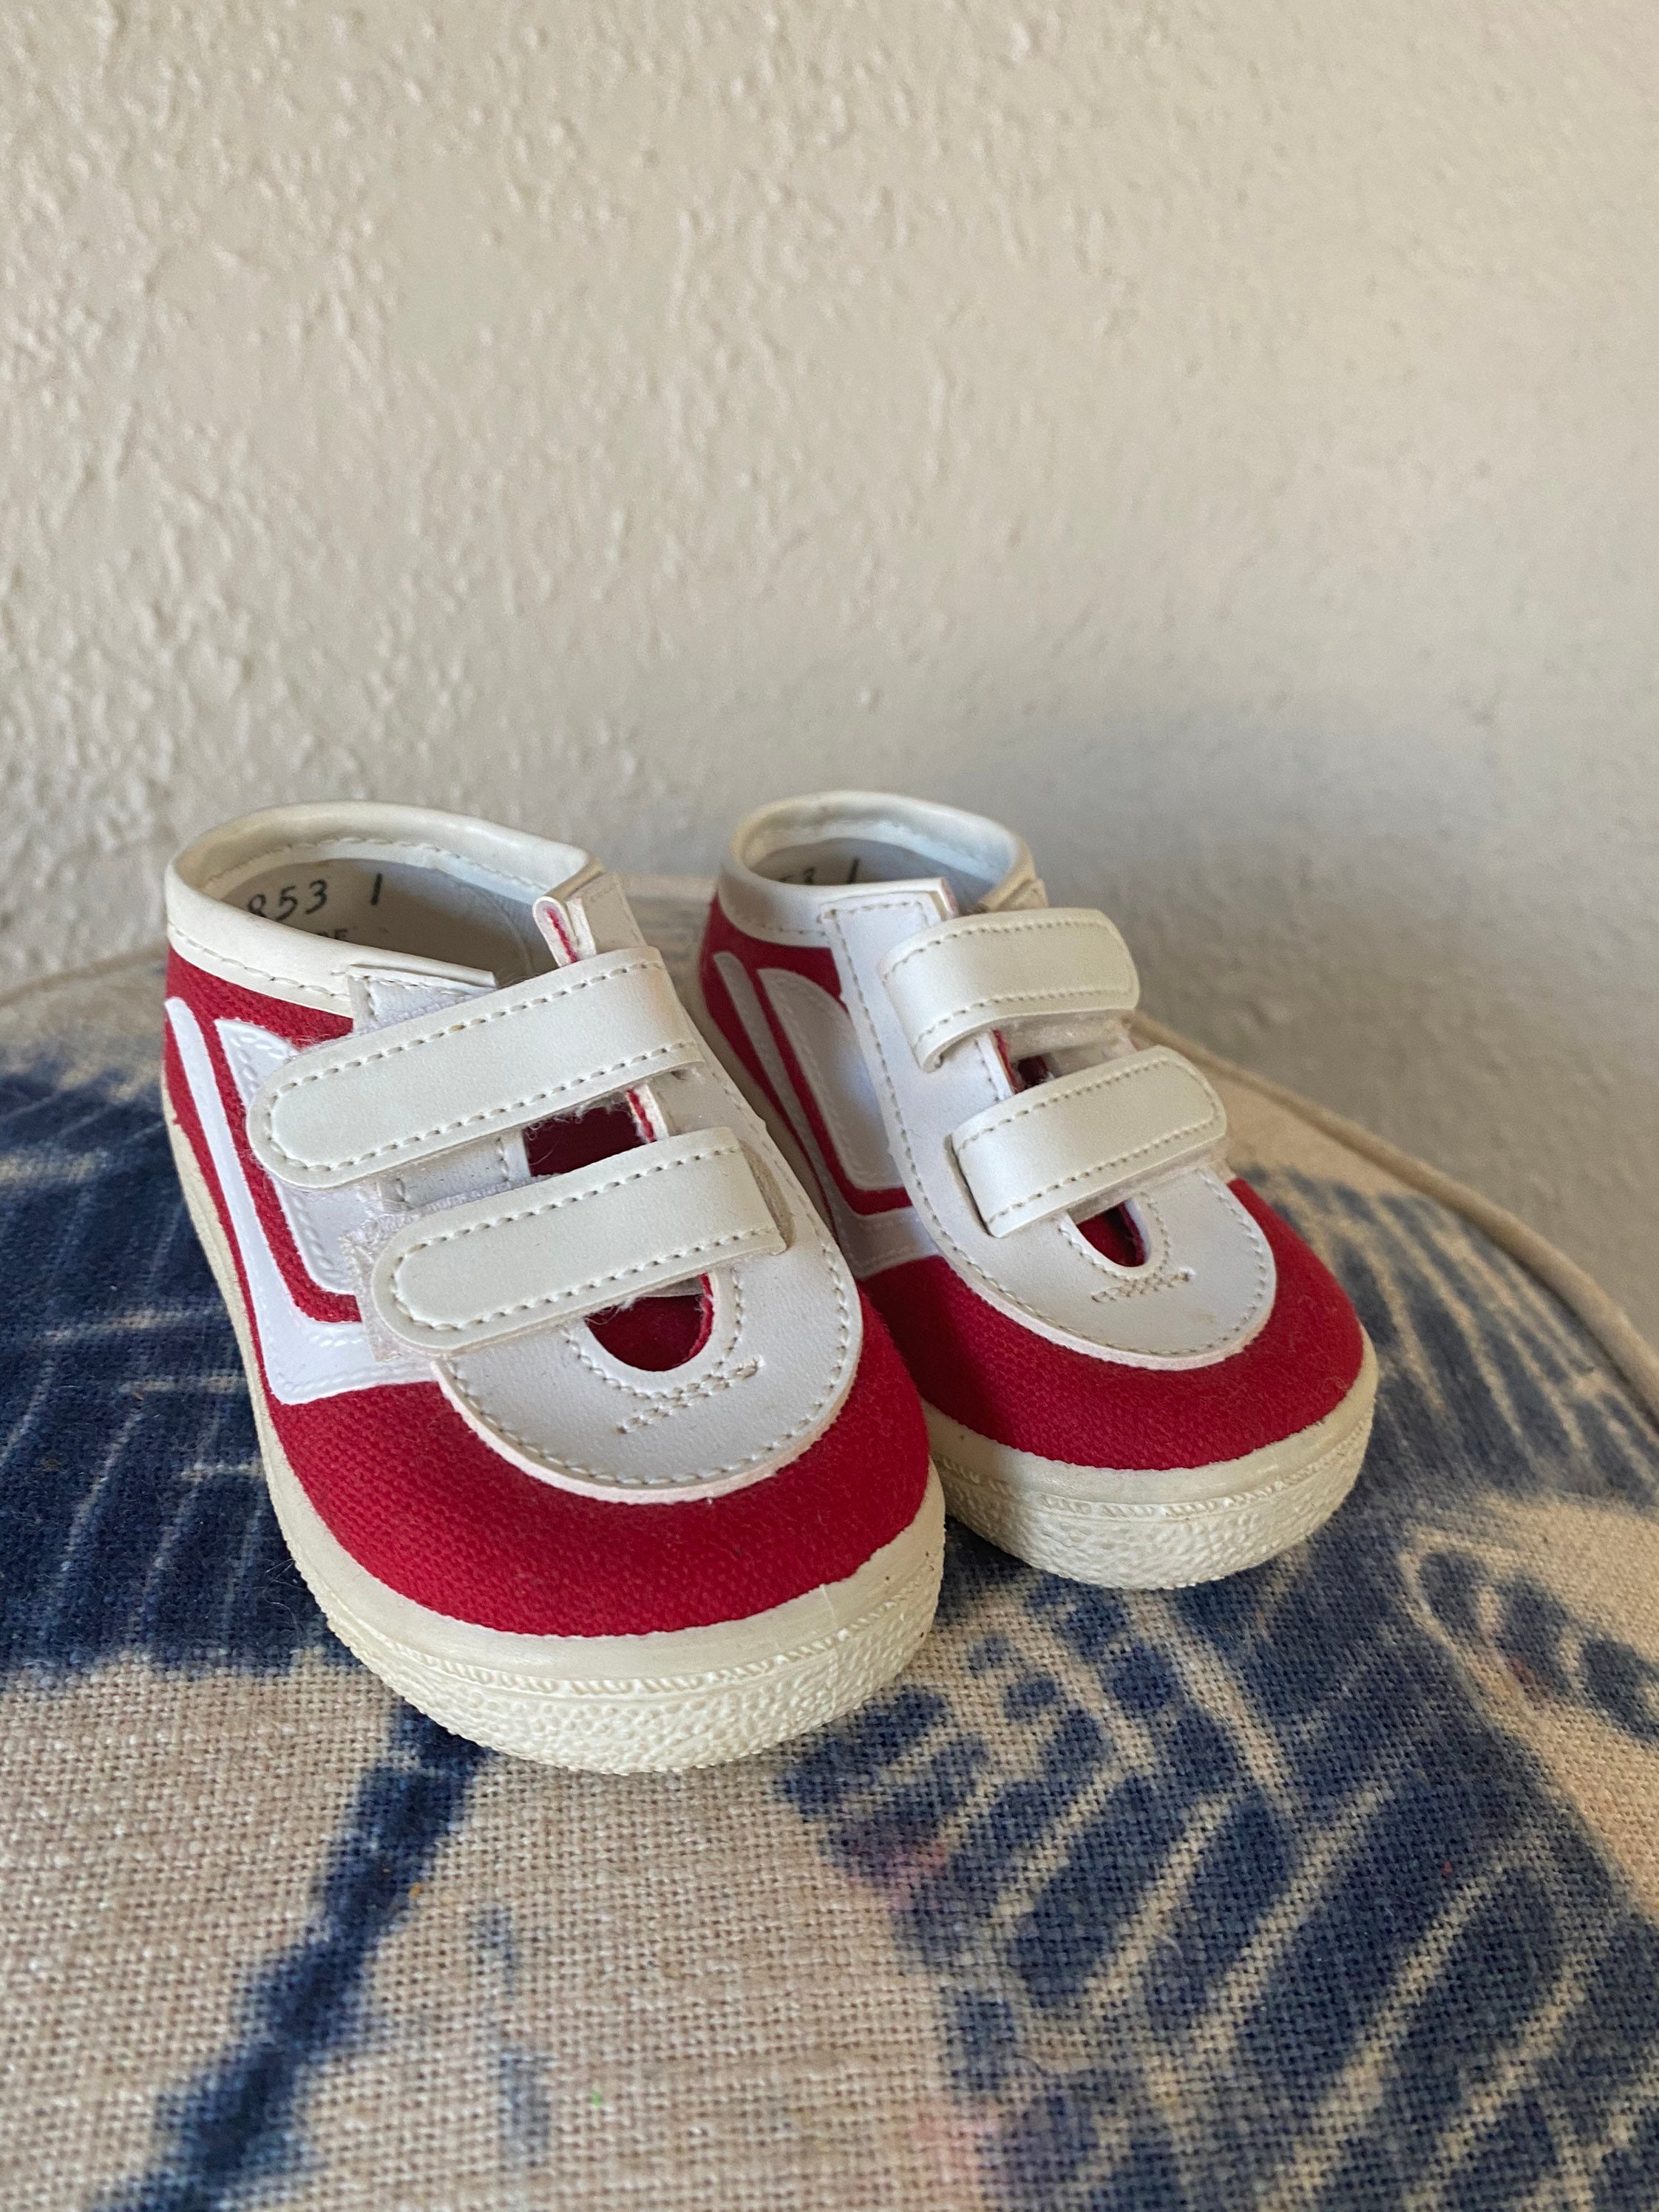 1970s Velcro Sneakers Baby Size 1 Made In USA | Etsy